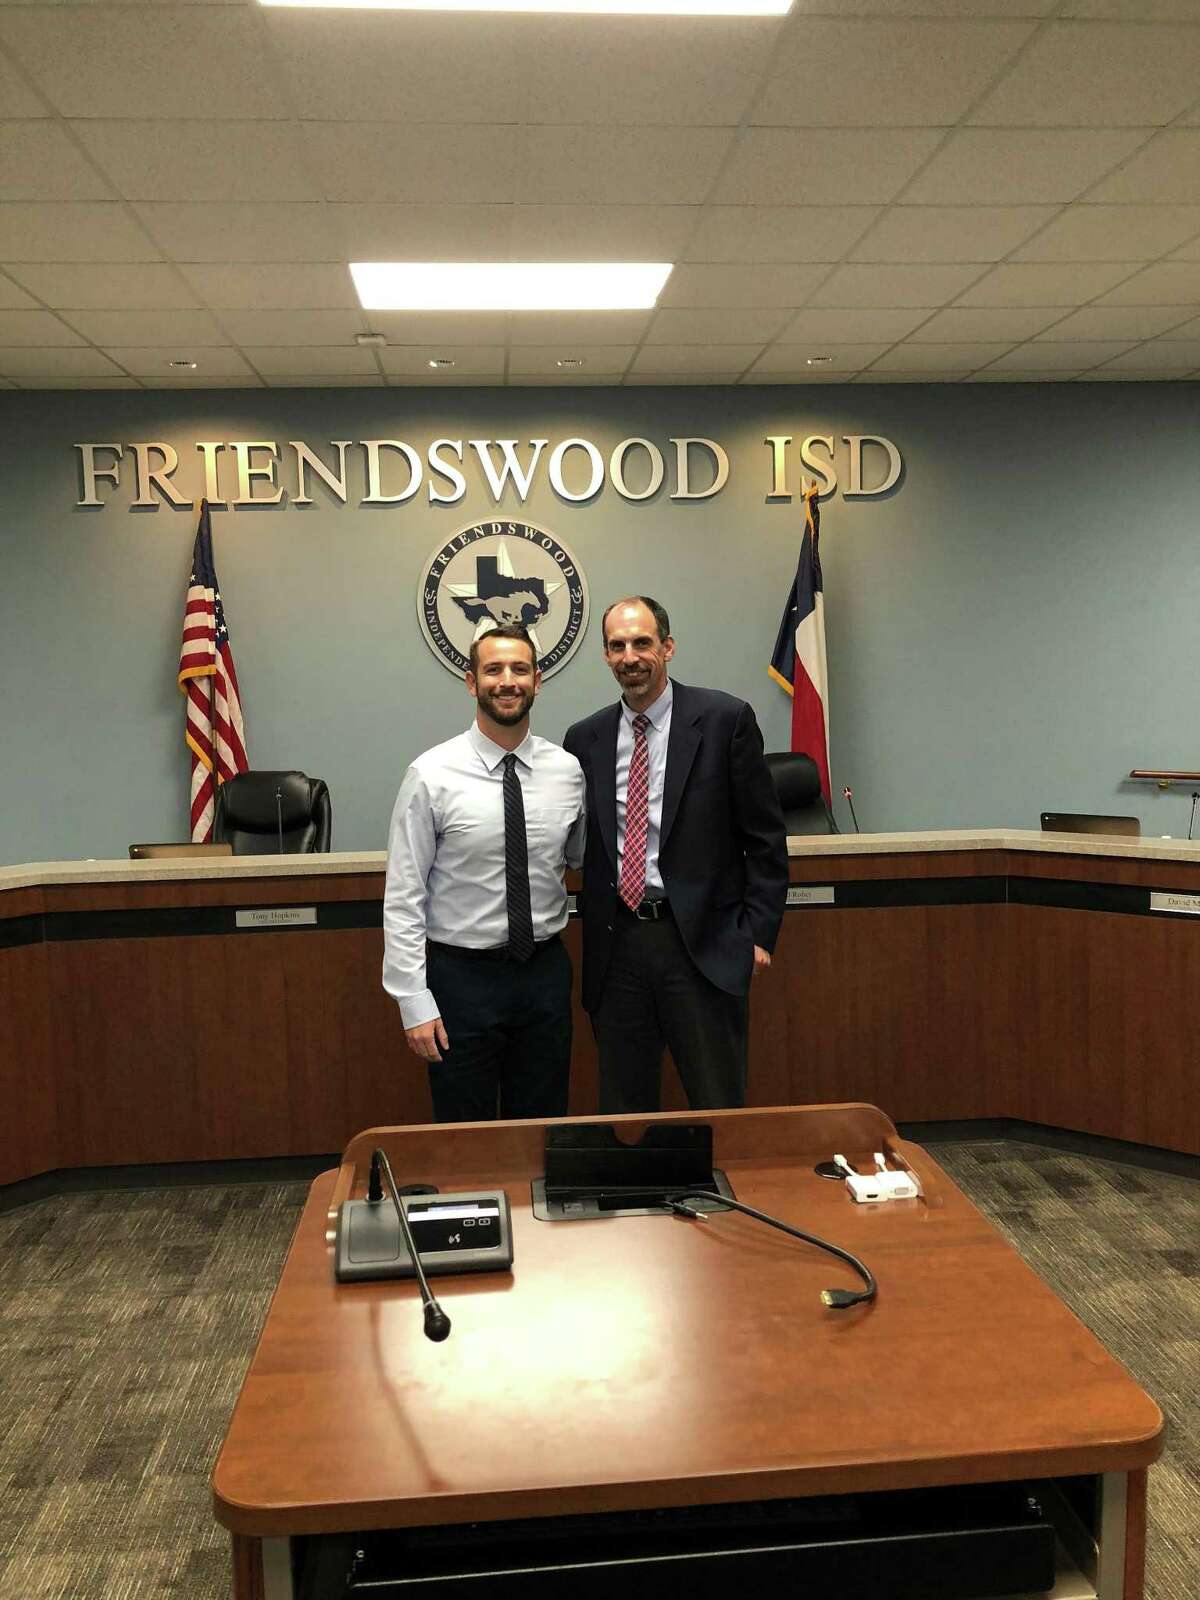 Cory Benavides (left) has been hired as the new head baseball coach at Friendswood High School. Benavides is shown with Friendswood ISD superintendent Thad Roher.